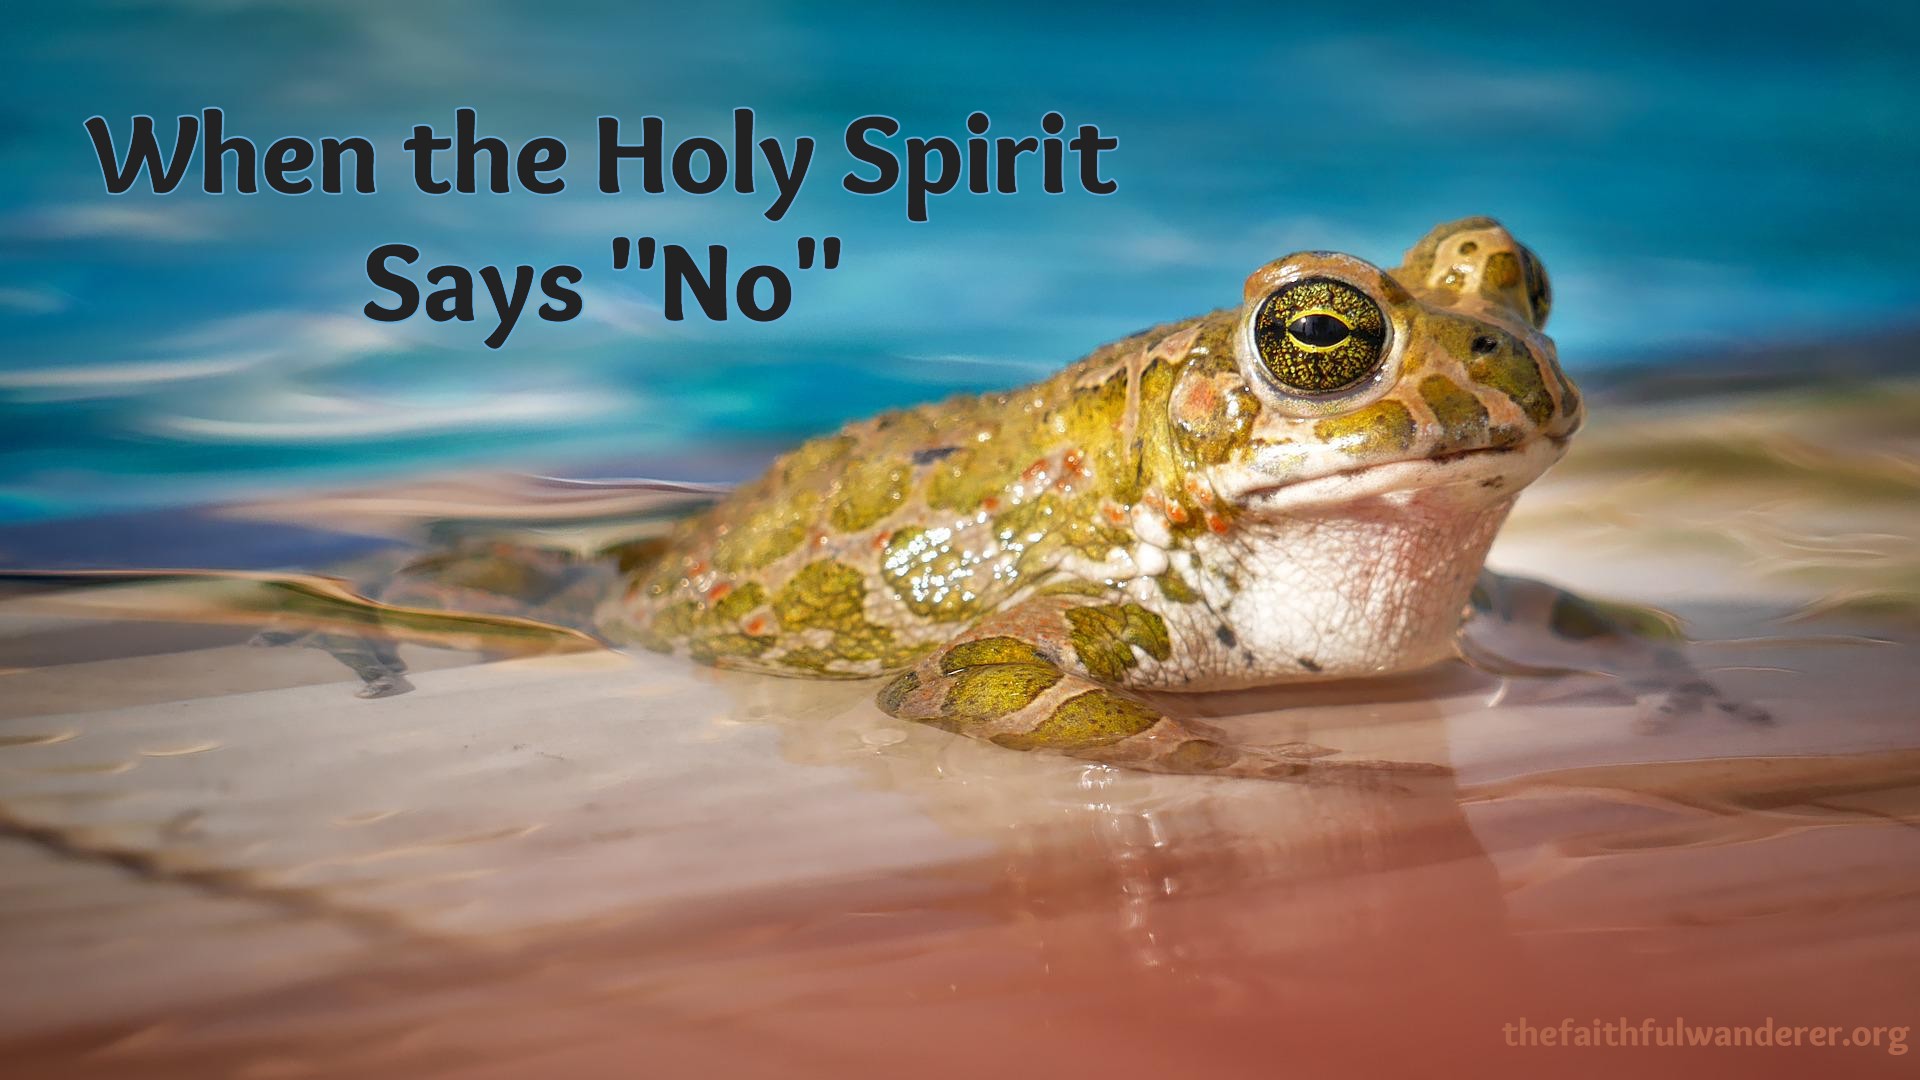 When the Holy Spirit Says “No”